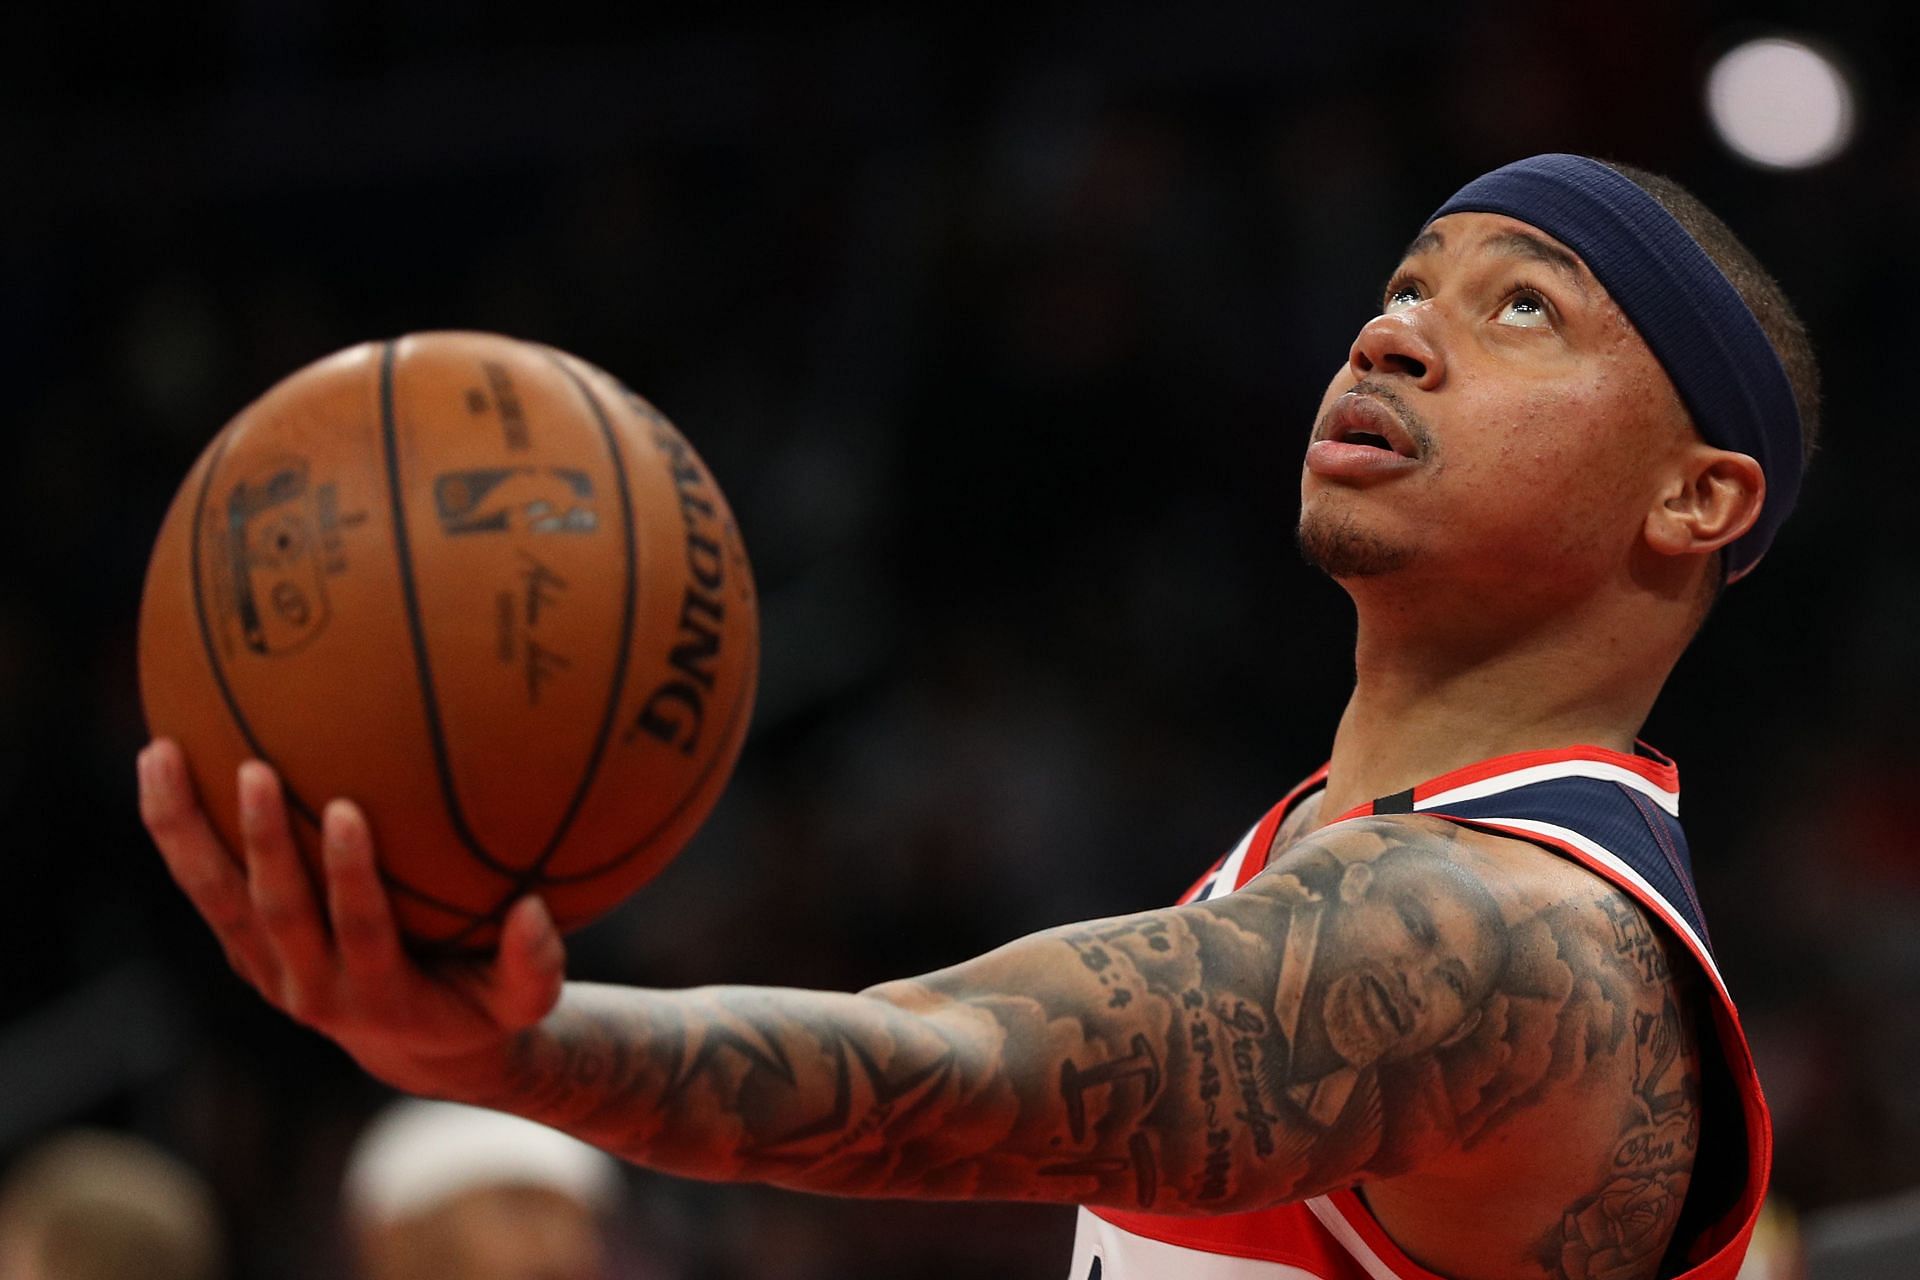 Isaiah Thomas to sign with Lakers after scoring 42 points for